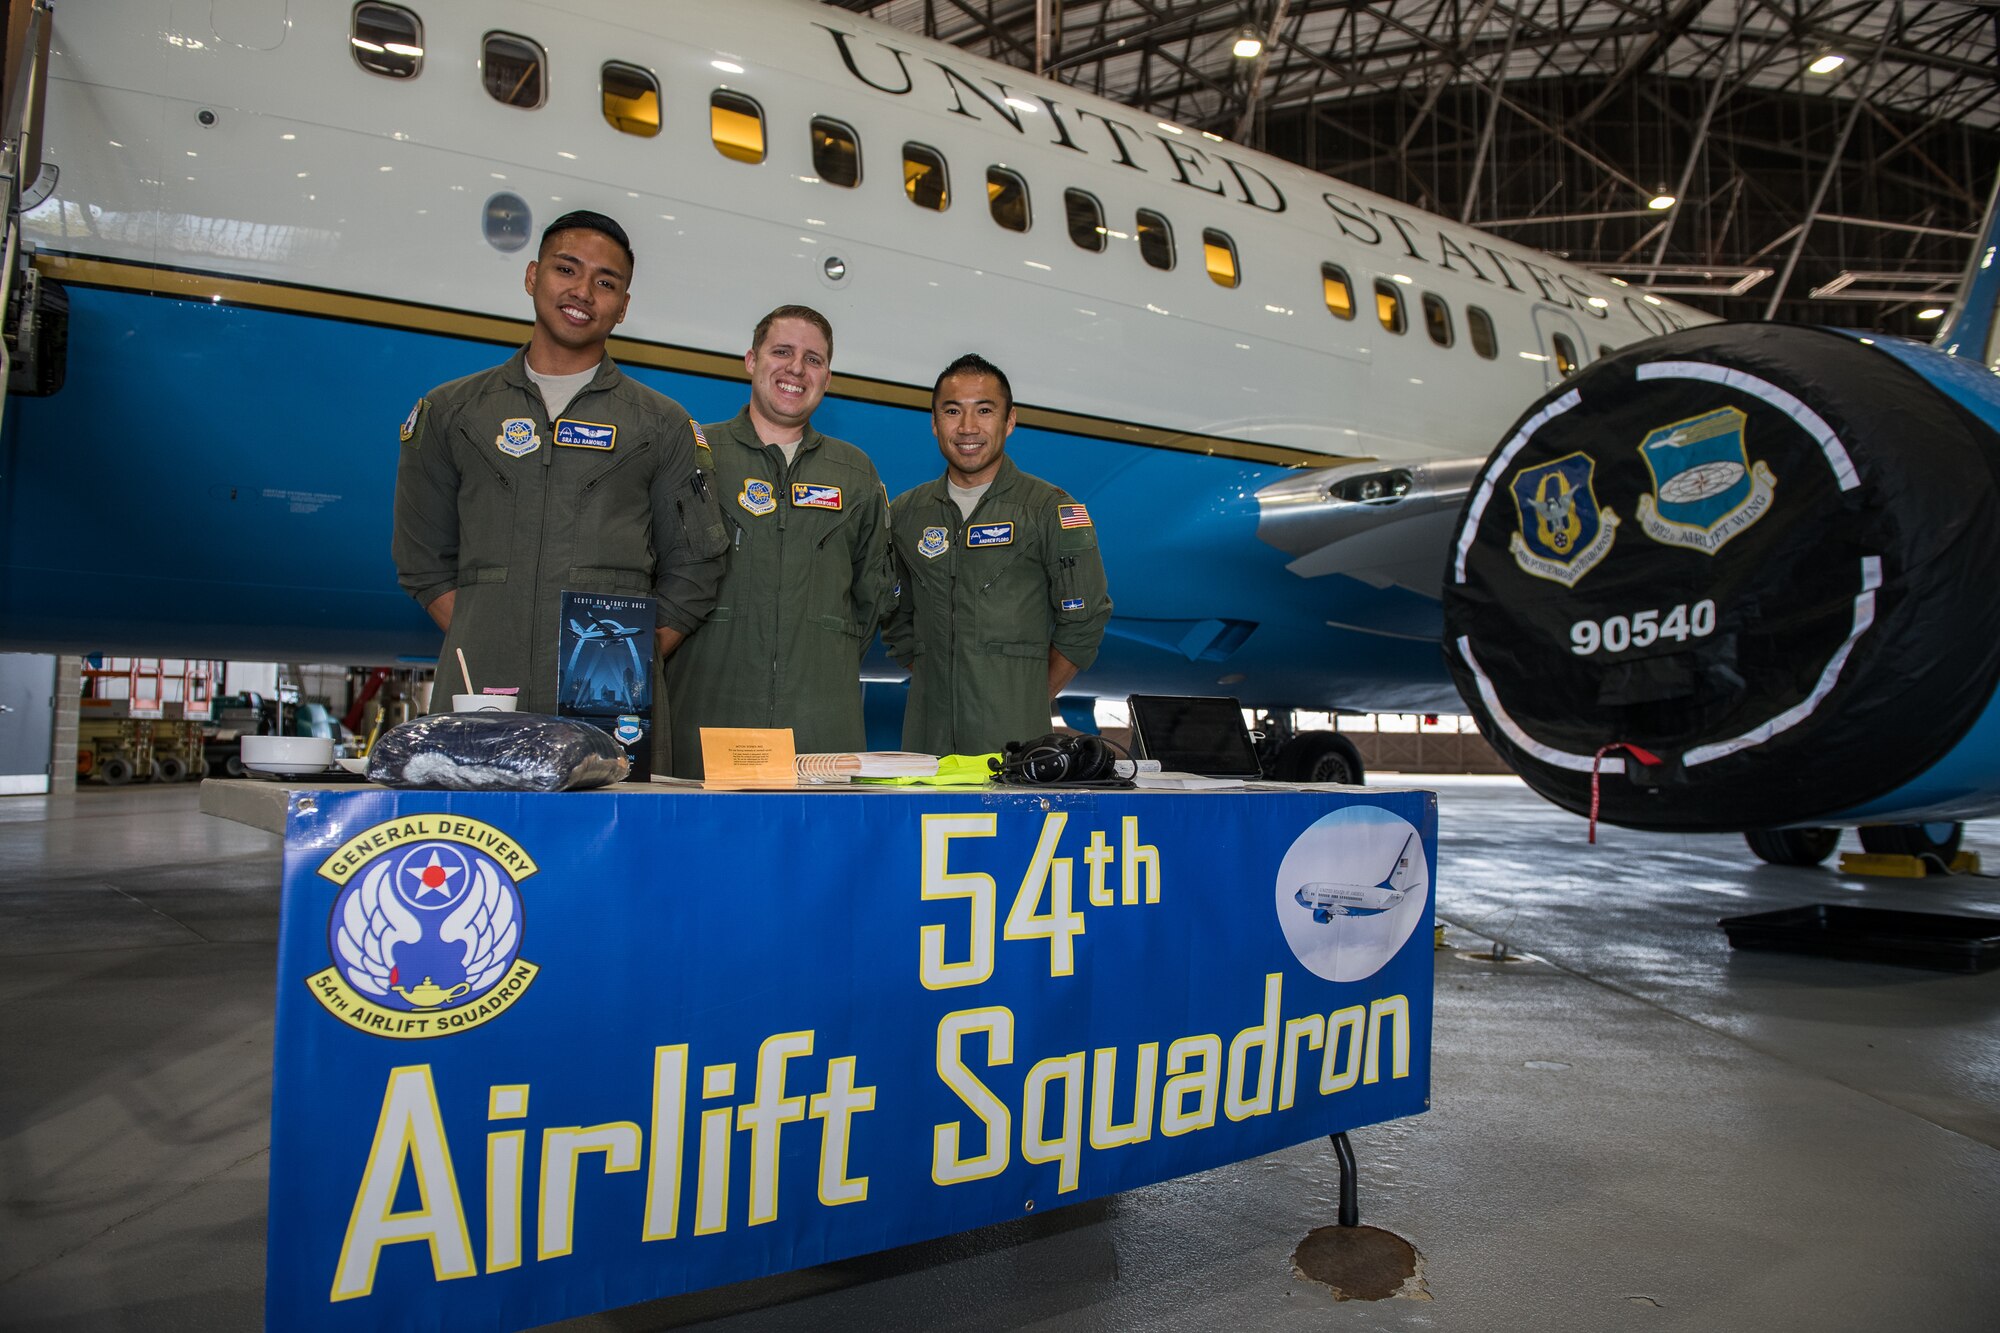 Crew from the 54th Airlift Squadron, pilots  Maj. Andrew Floro, right, Maj. Neal Brinkworth, center, and executive flight attendant Senior Airman DJ Ramones, take a photo moment before giving tours of the 932nd Airlift Wing C-40 aircraft and sharing their Air Force careers with nearly 400 visiting JROTC high students from Missouri and Illinois, Oct. 8, 2019, Scott Air Force Base, Illinois. (U.S. Air Force photo by Christopher Parr)